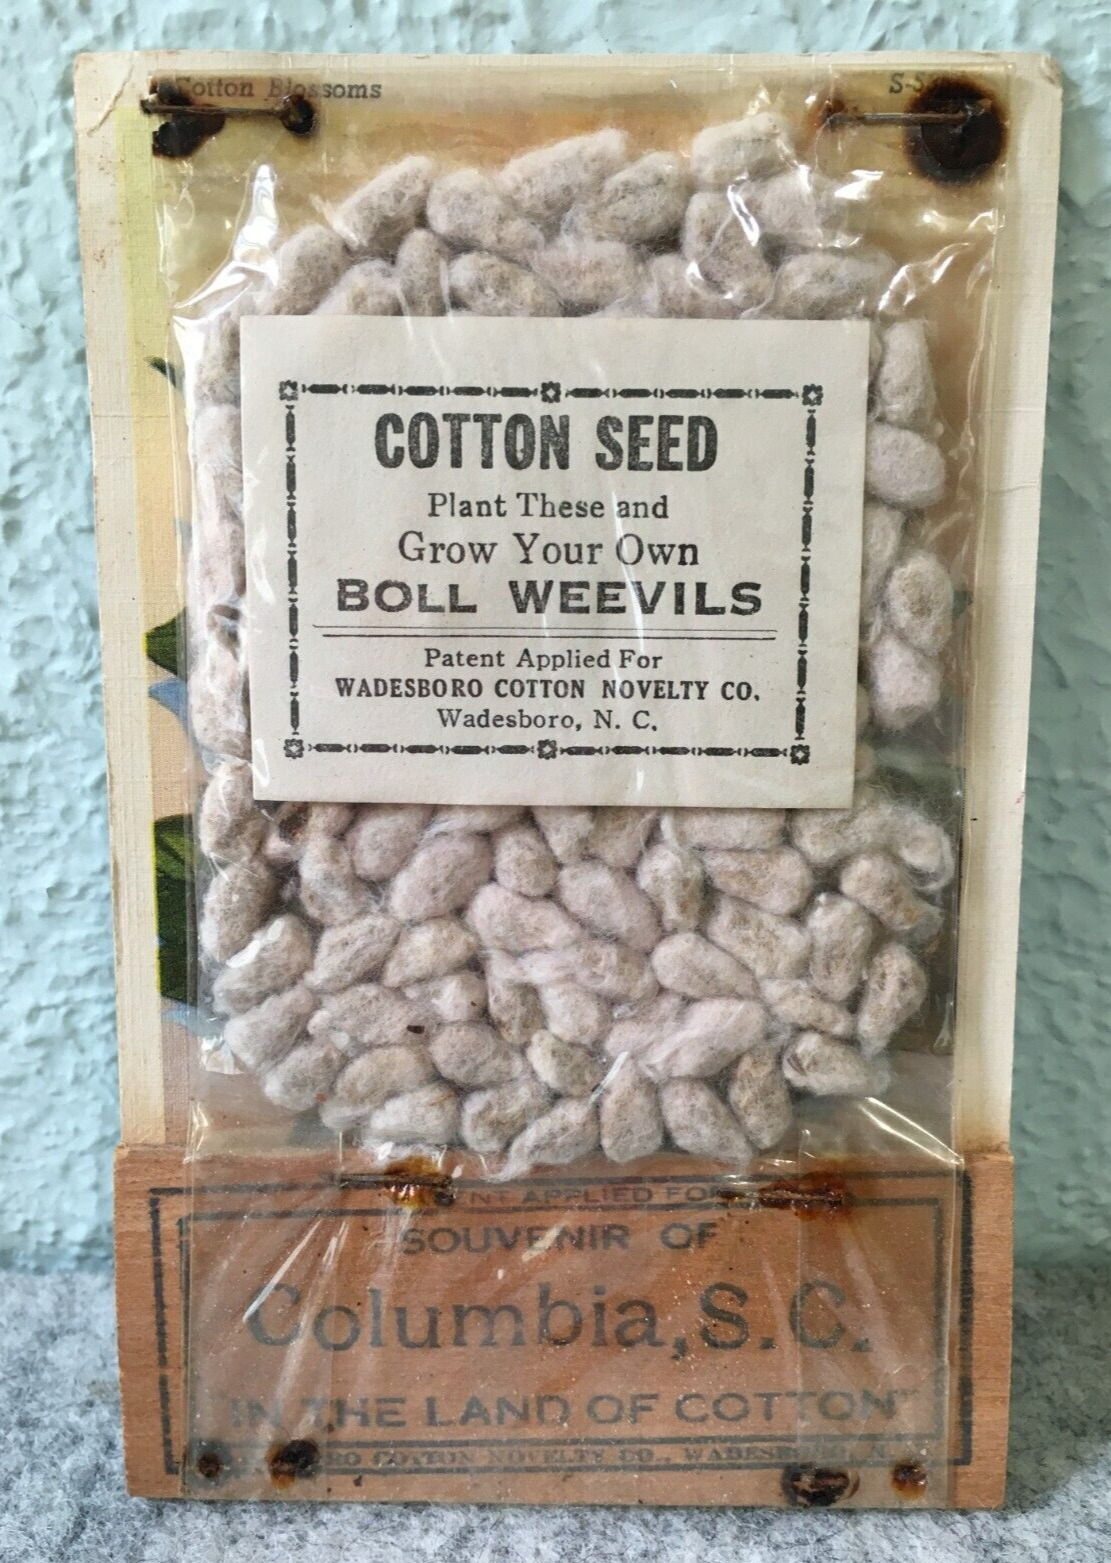 Columbia South Carolina Cotton Seed & Boll Weevils 1 Cent Wood Post Card Vintage